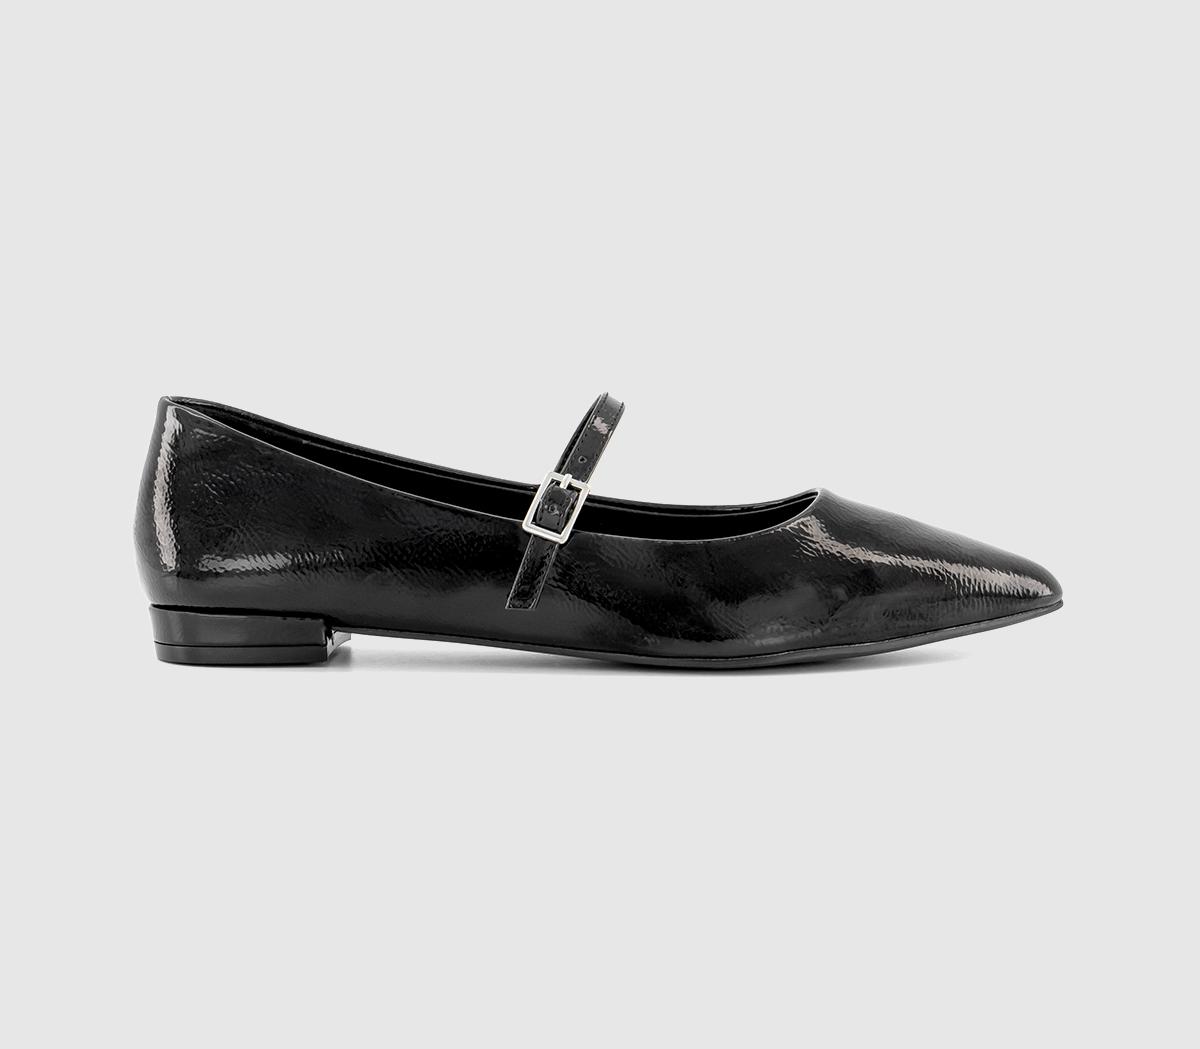 OFFICEFreddie Pointed Toe Mary Jane ShoesBlack Patent